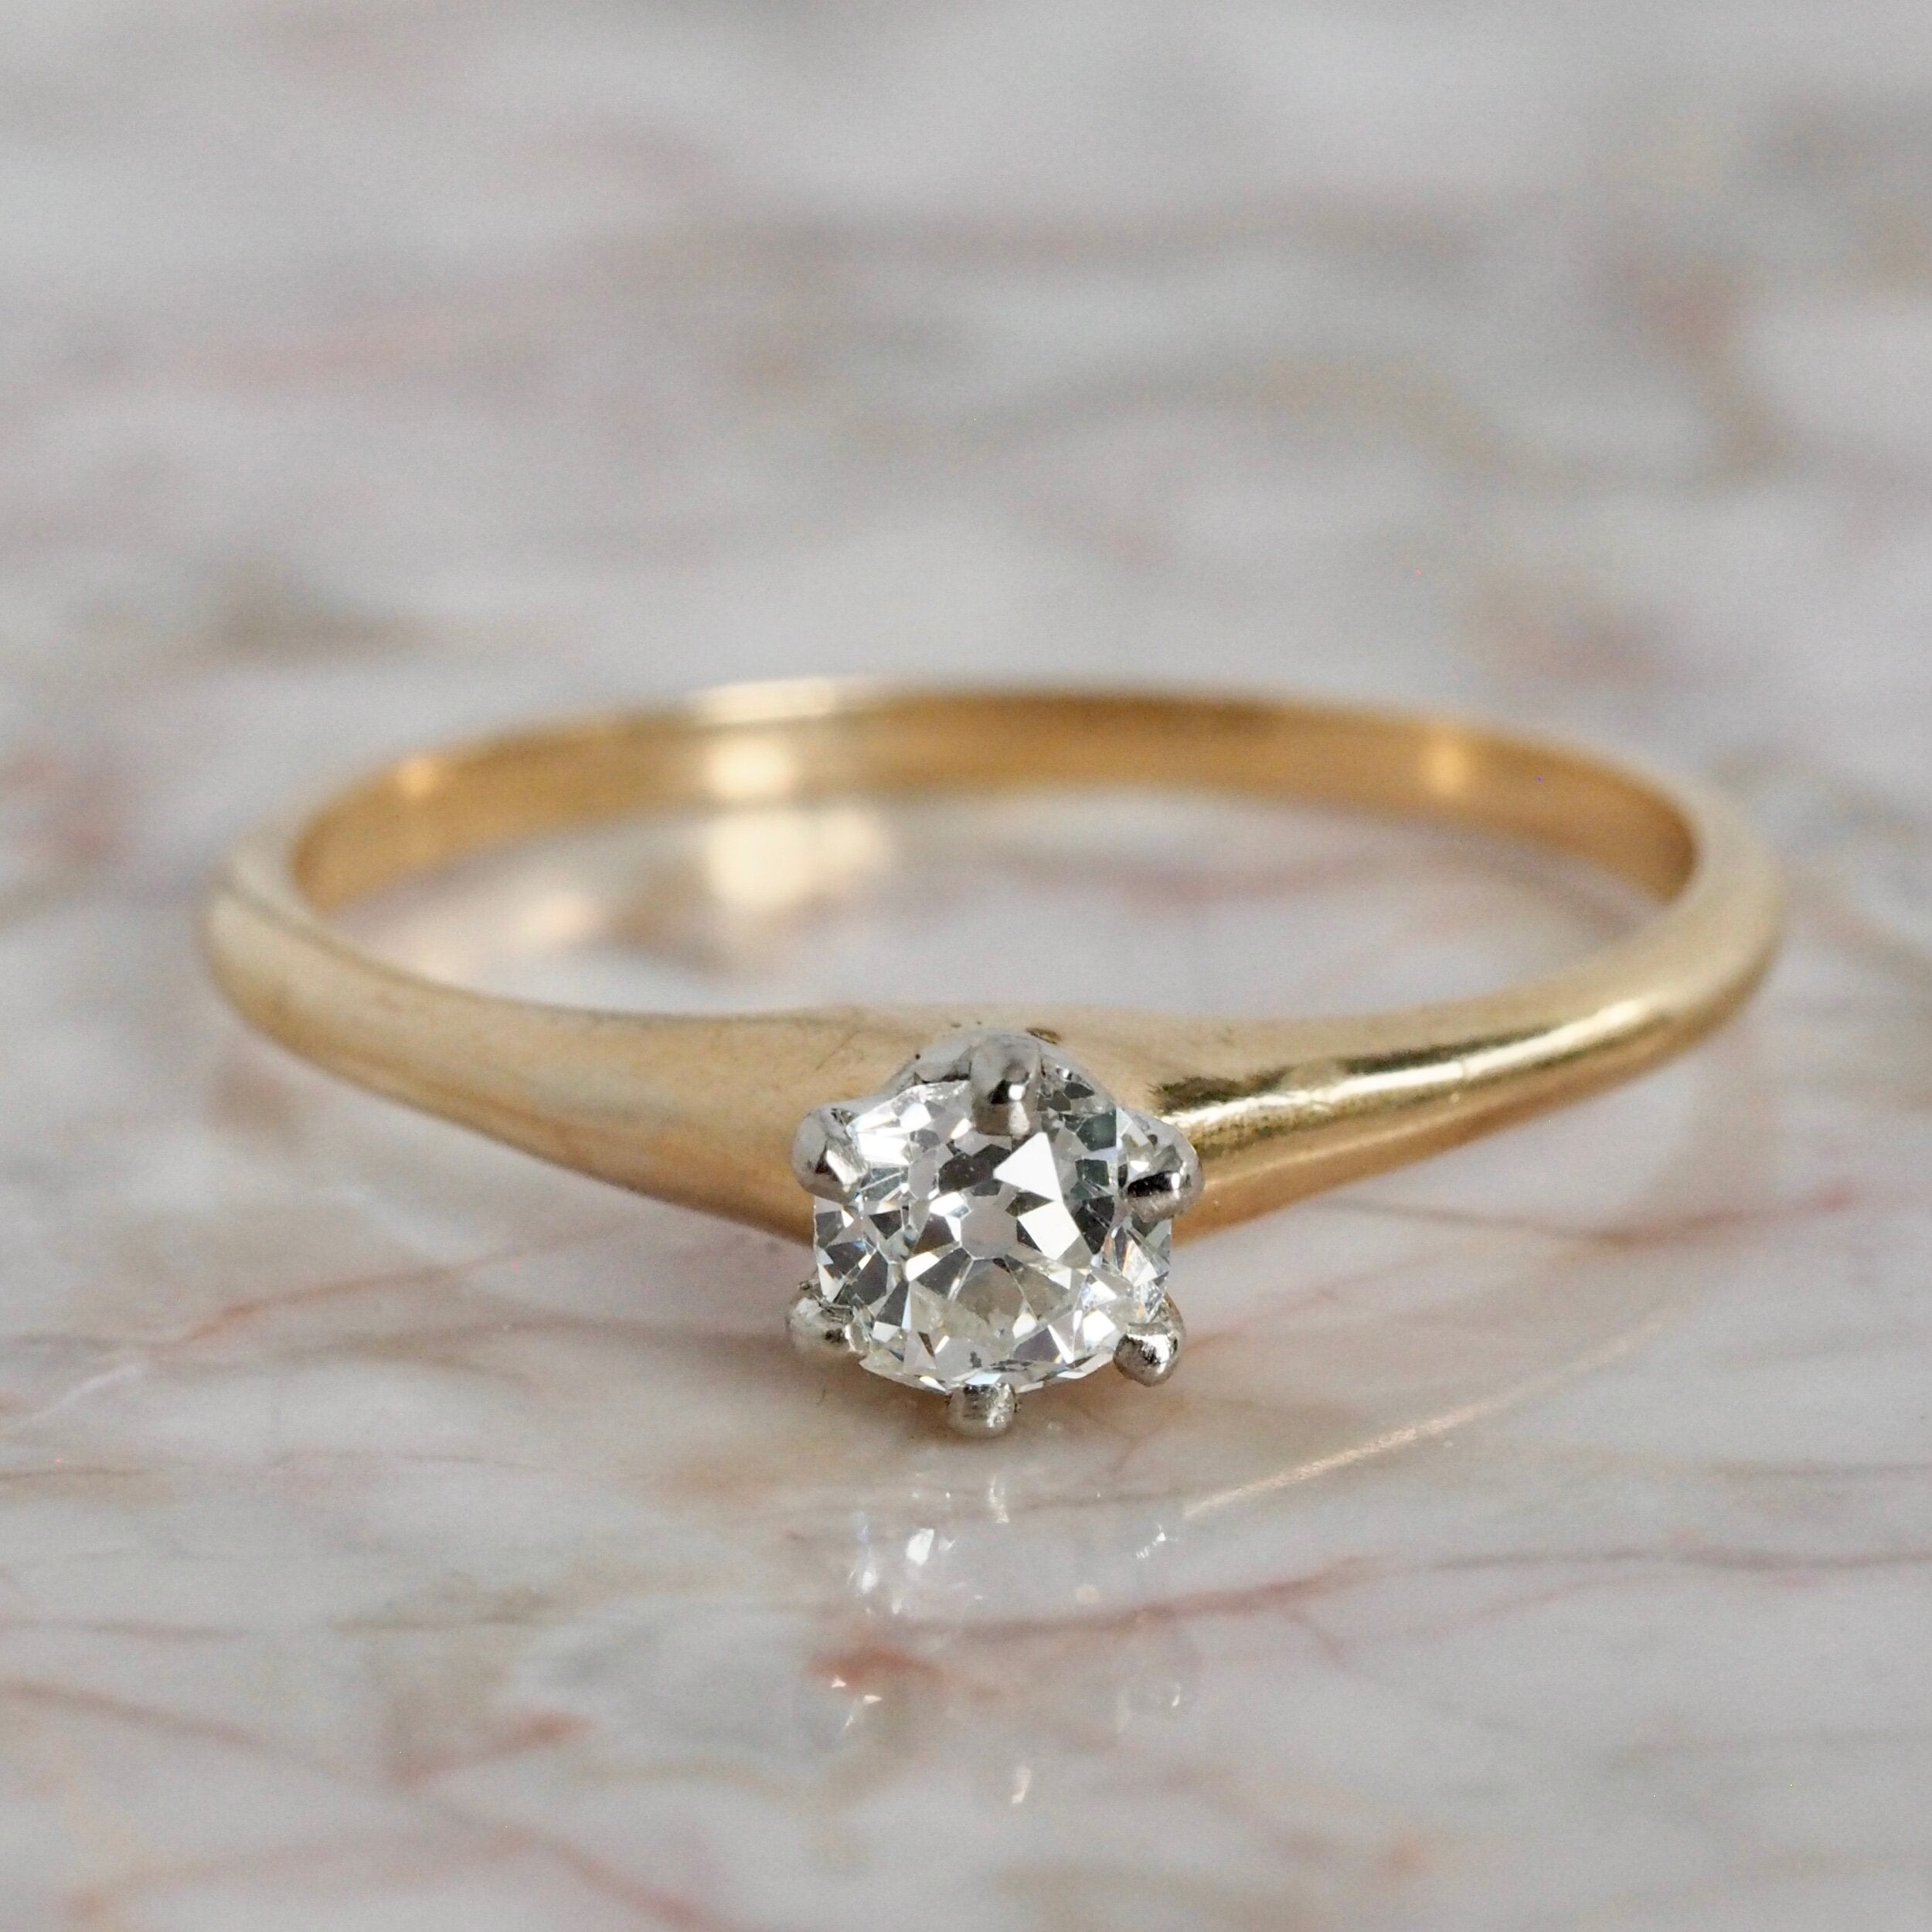 Vintage | Antique Three Old Mine Cut Diamond Ring at Voiage Jewelry